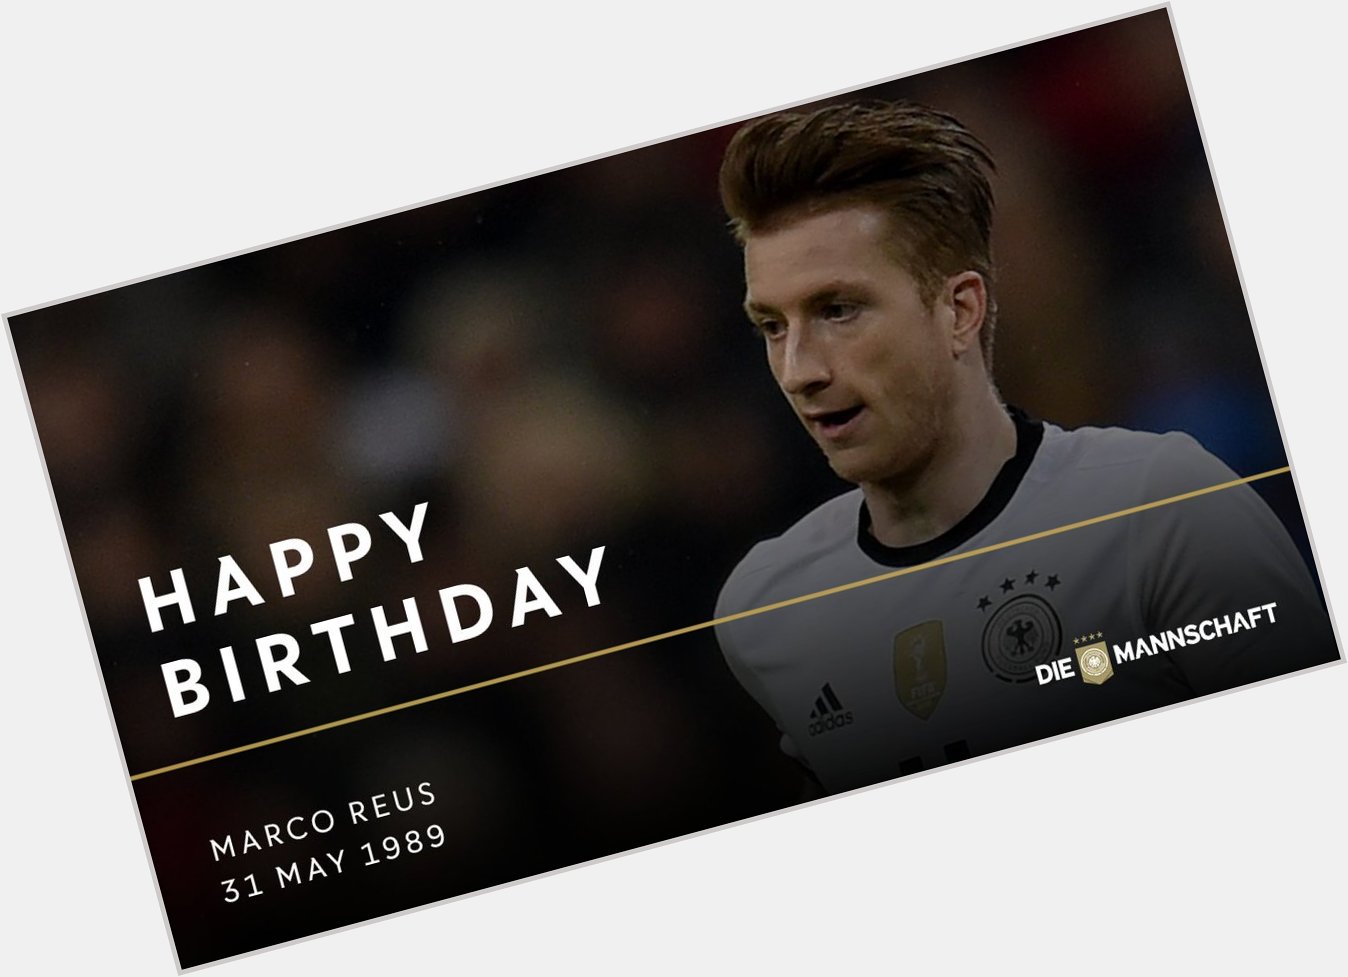 Happy 2  8  th Birthday to Marco Reus! We hope you\re having a great day, and 